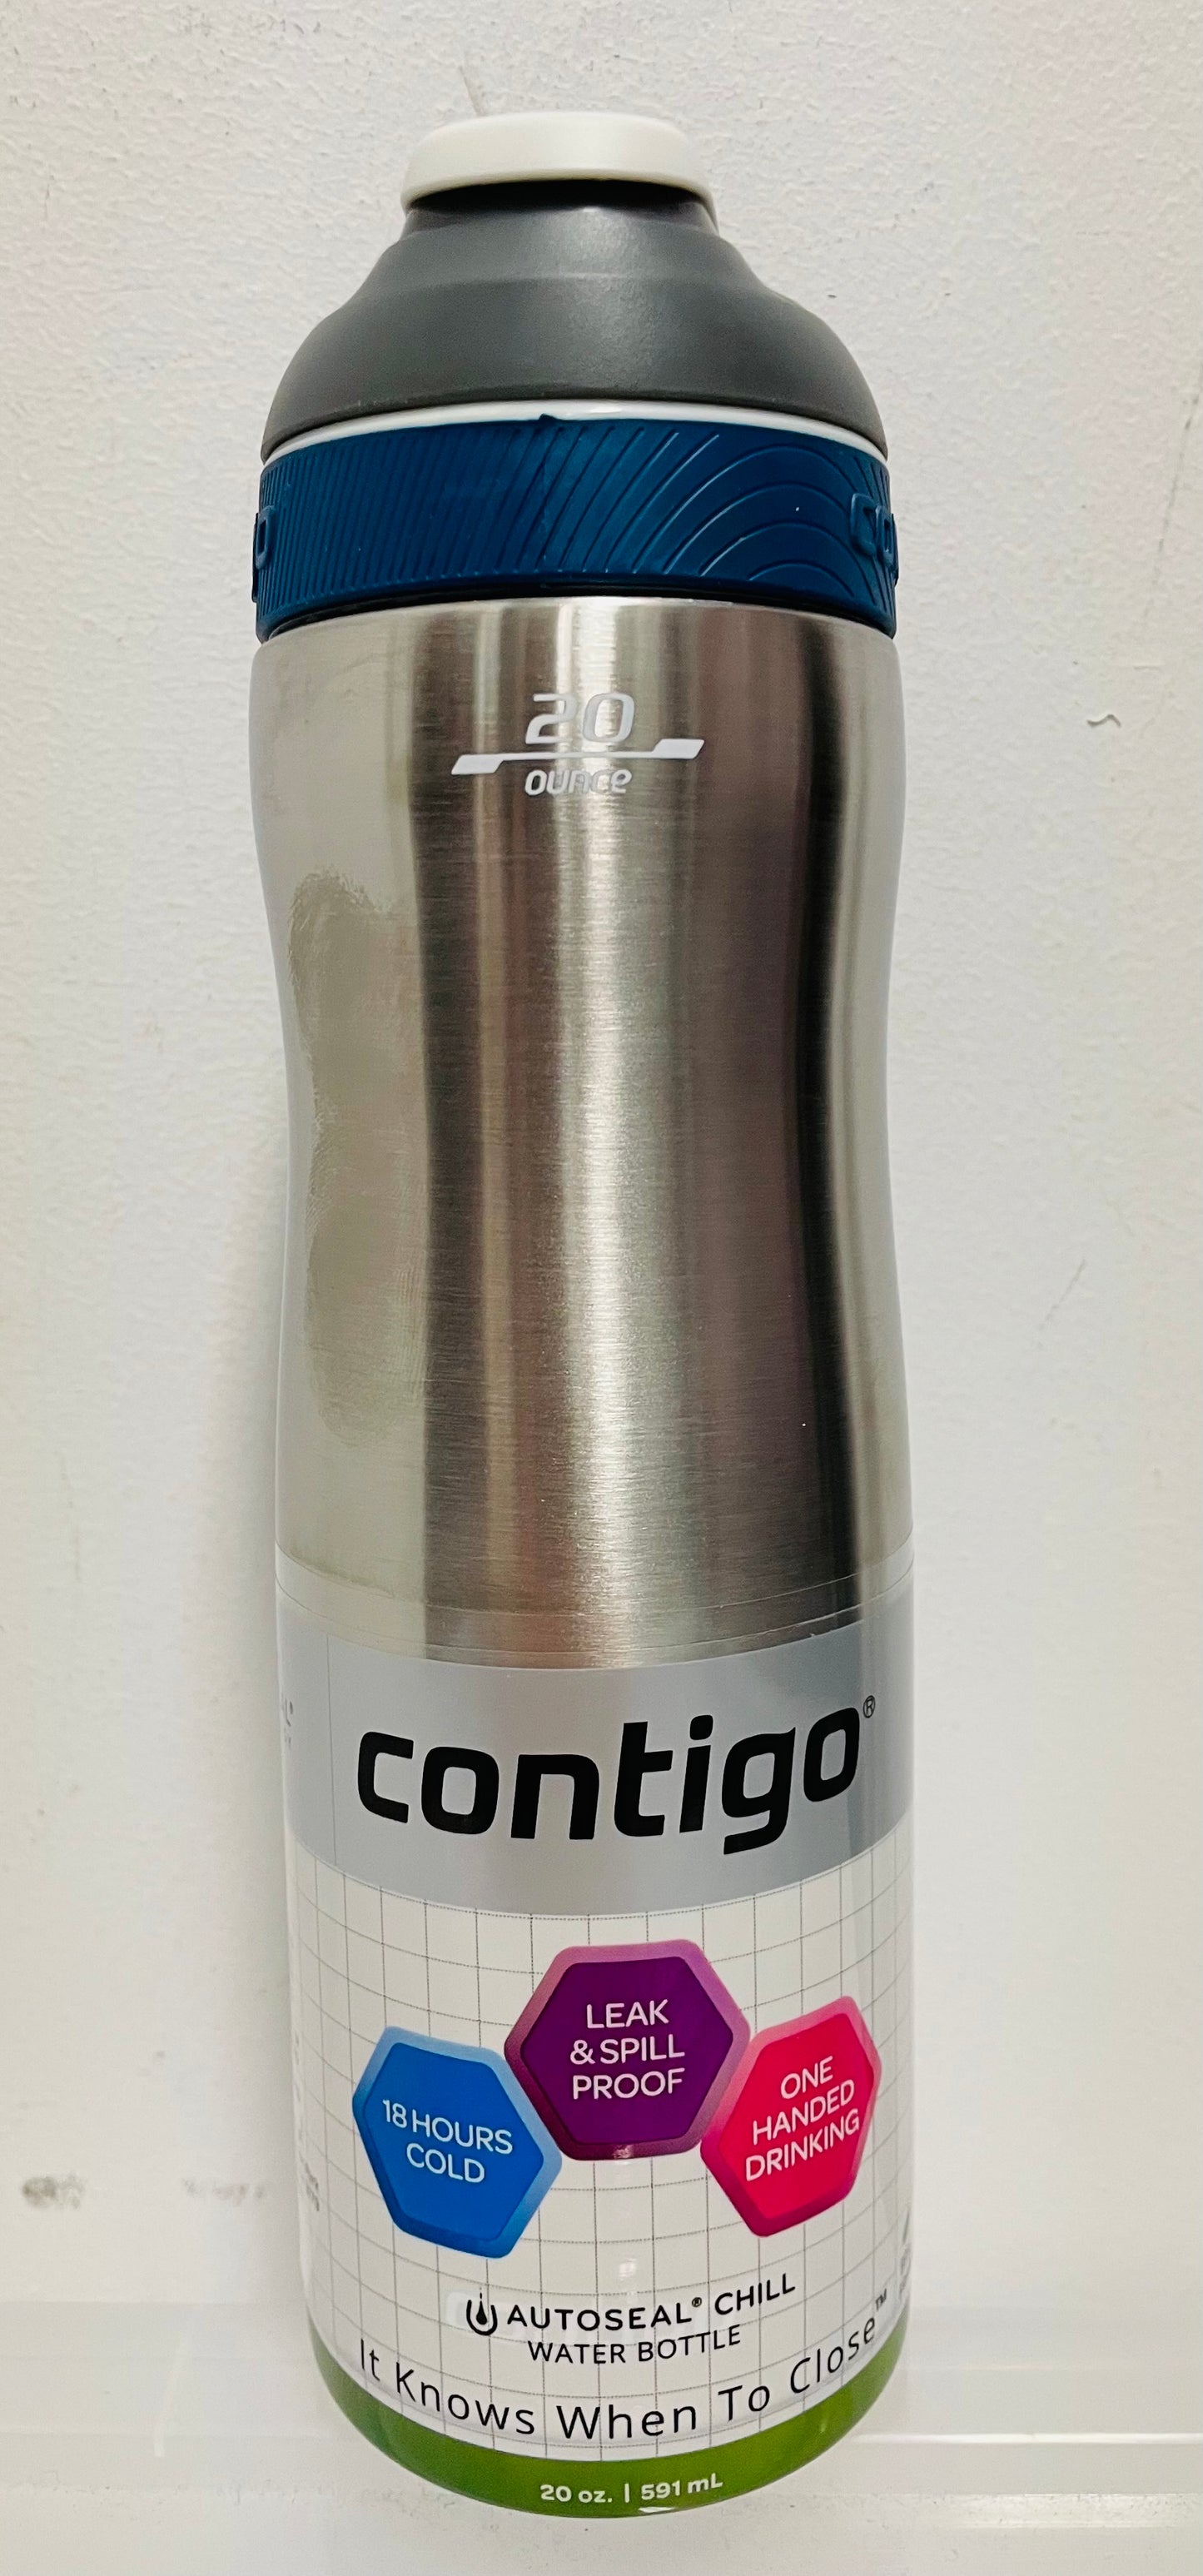 Contigo Cortland Chill Autoseal Bottle for working out or working at your desk, the double-wall vacuum-insulated stainless steel body keeps drinks cold for 24 hours & hot for 6 hours